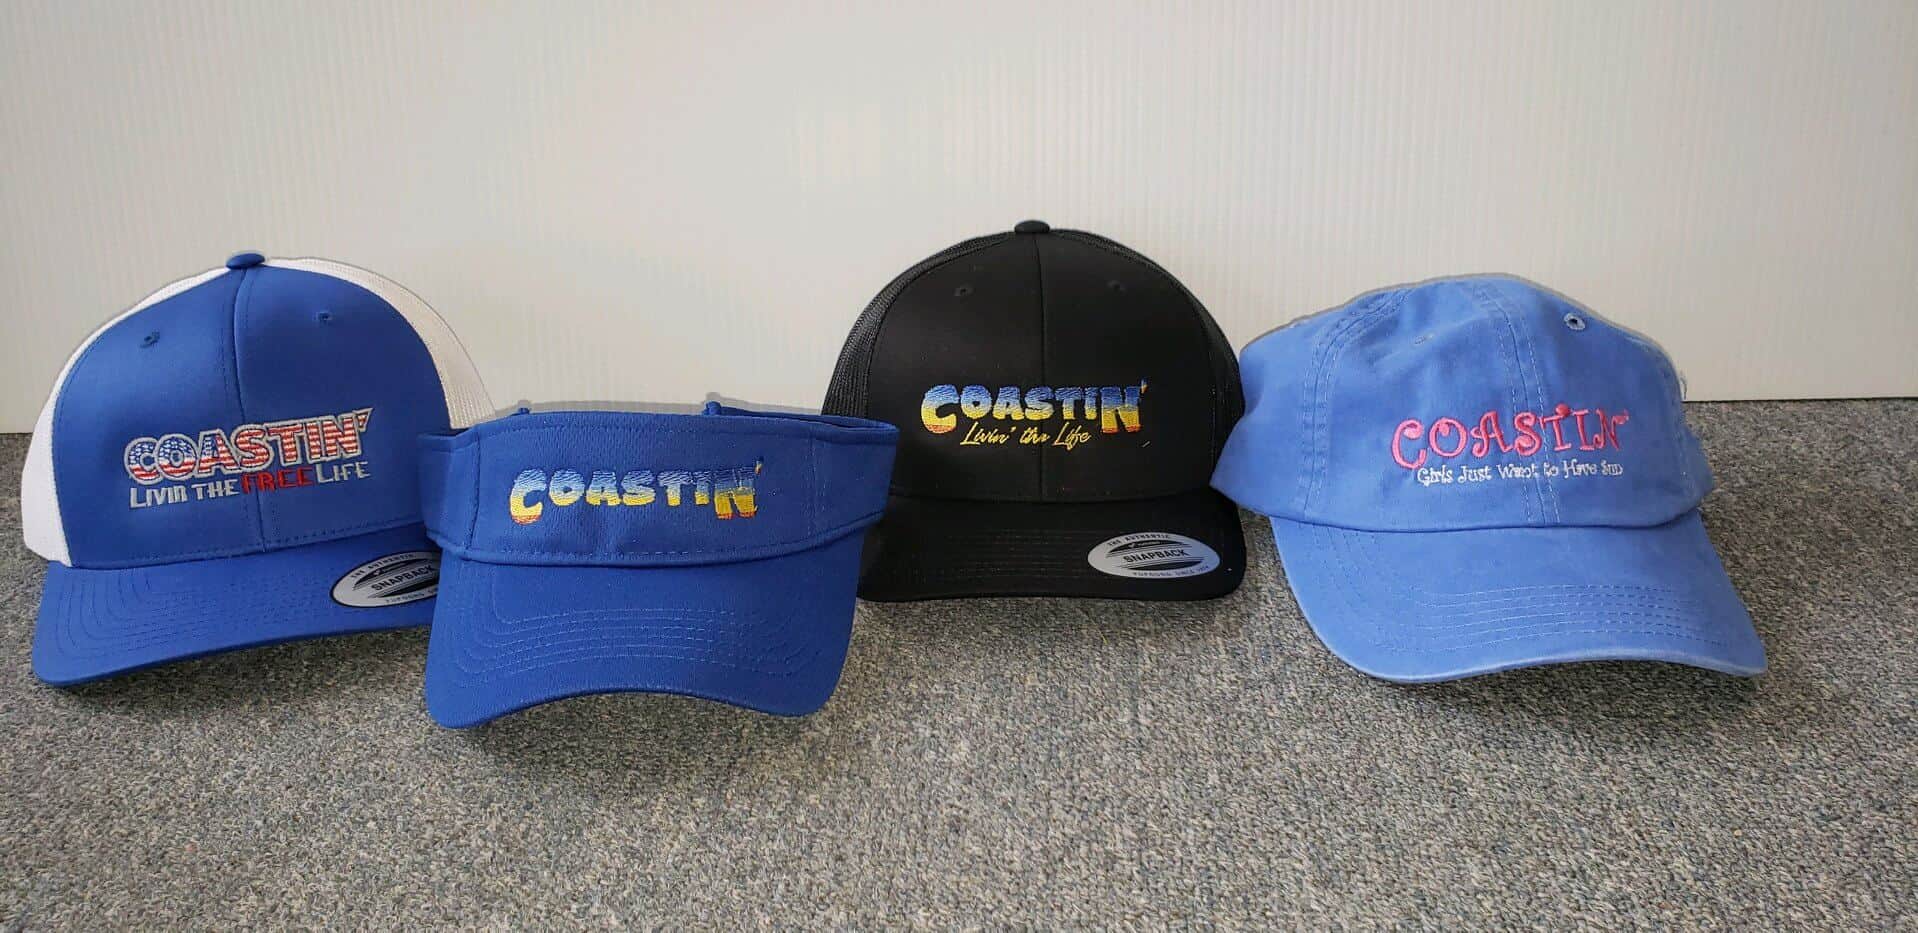 Ball caps. Screen print or Embroider name, logo, and slogan. Great promotional item for events and tradeshows. Ball Caps for team wear, sports where, anywhere!